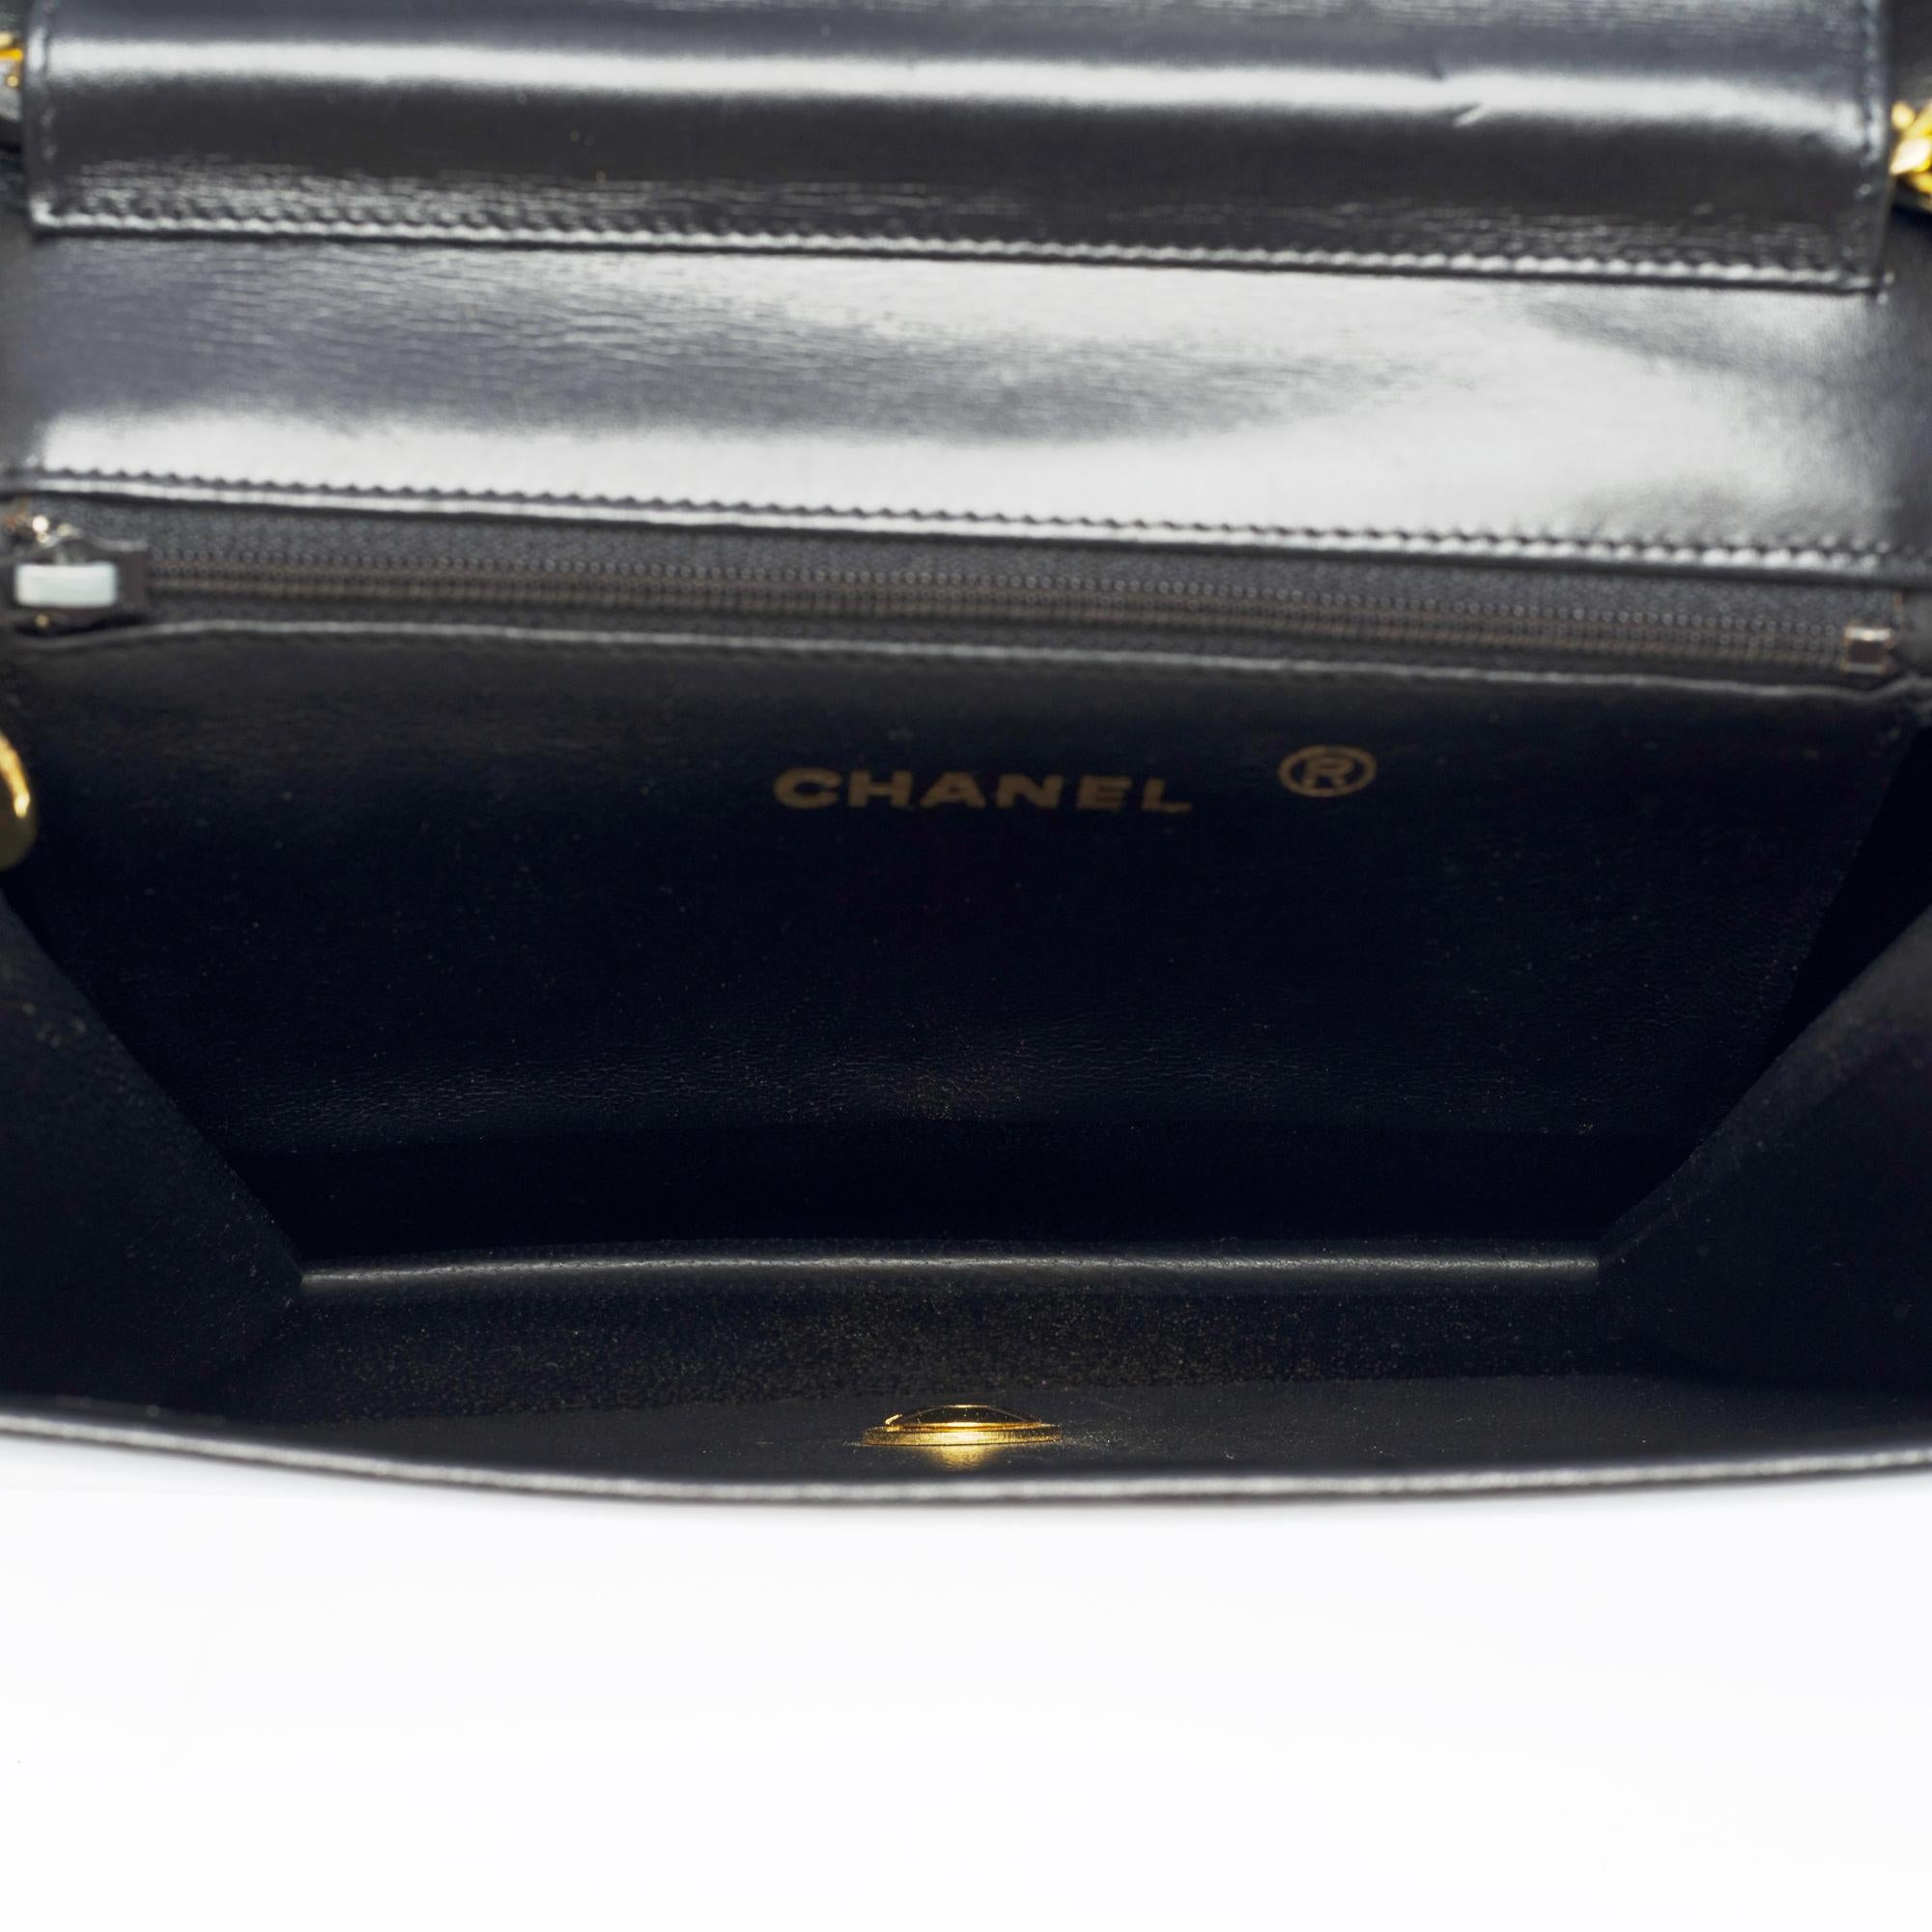 Gorgeous Chanel Classic shoulder flap bag in black box calfskin leather, GHW 13